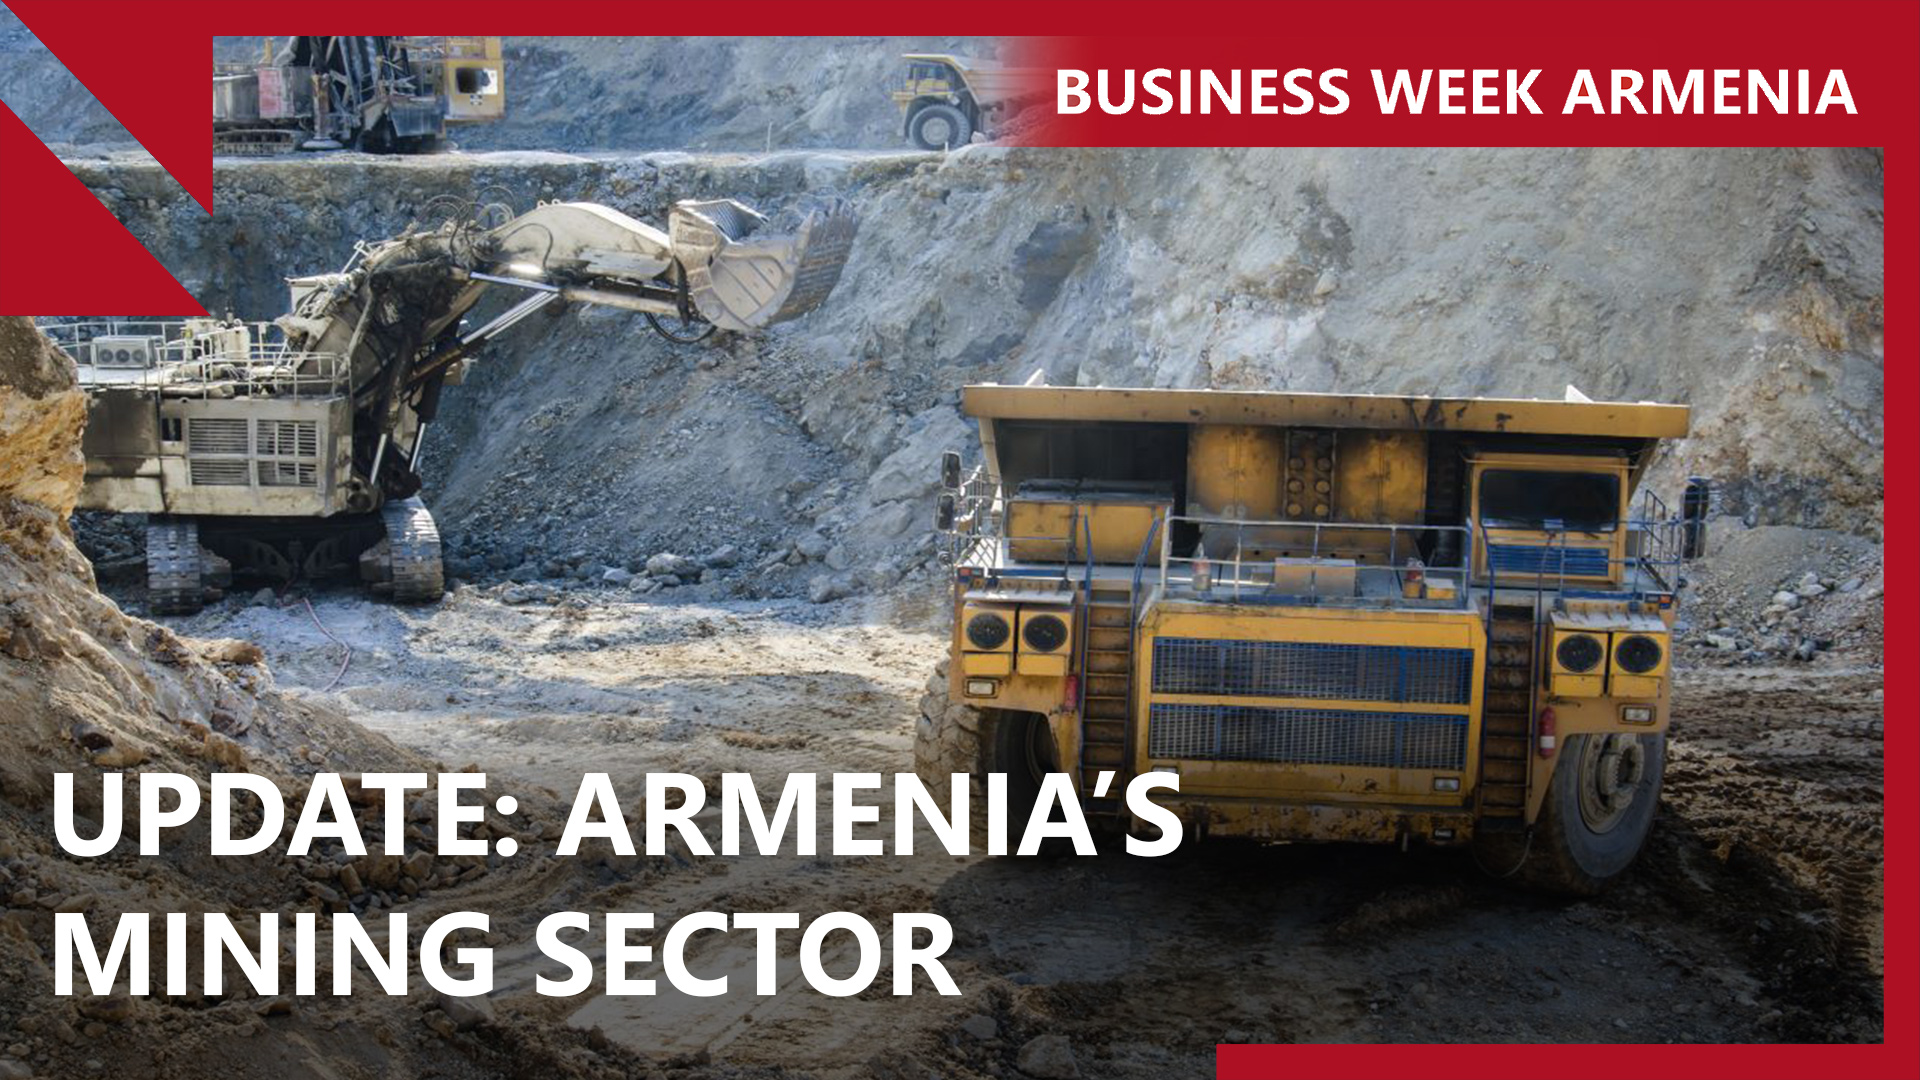 Armenia pushes ahead with major mining projects: THIS WEEK IN BUSINESS